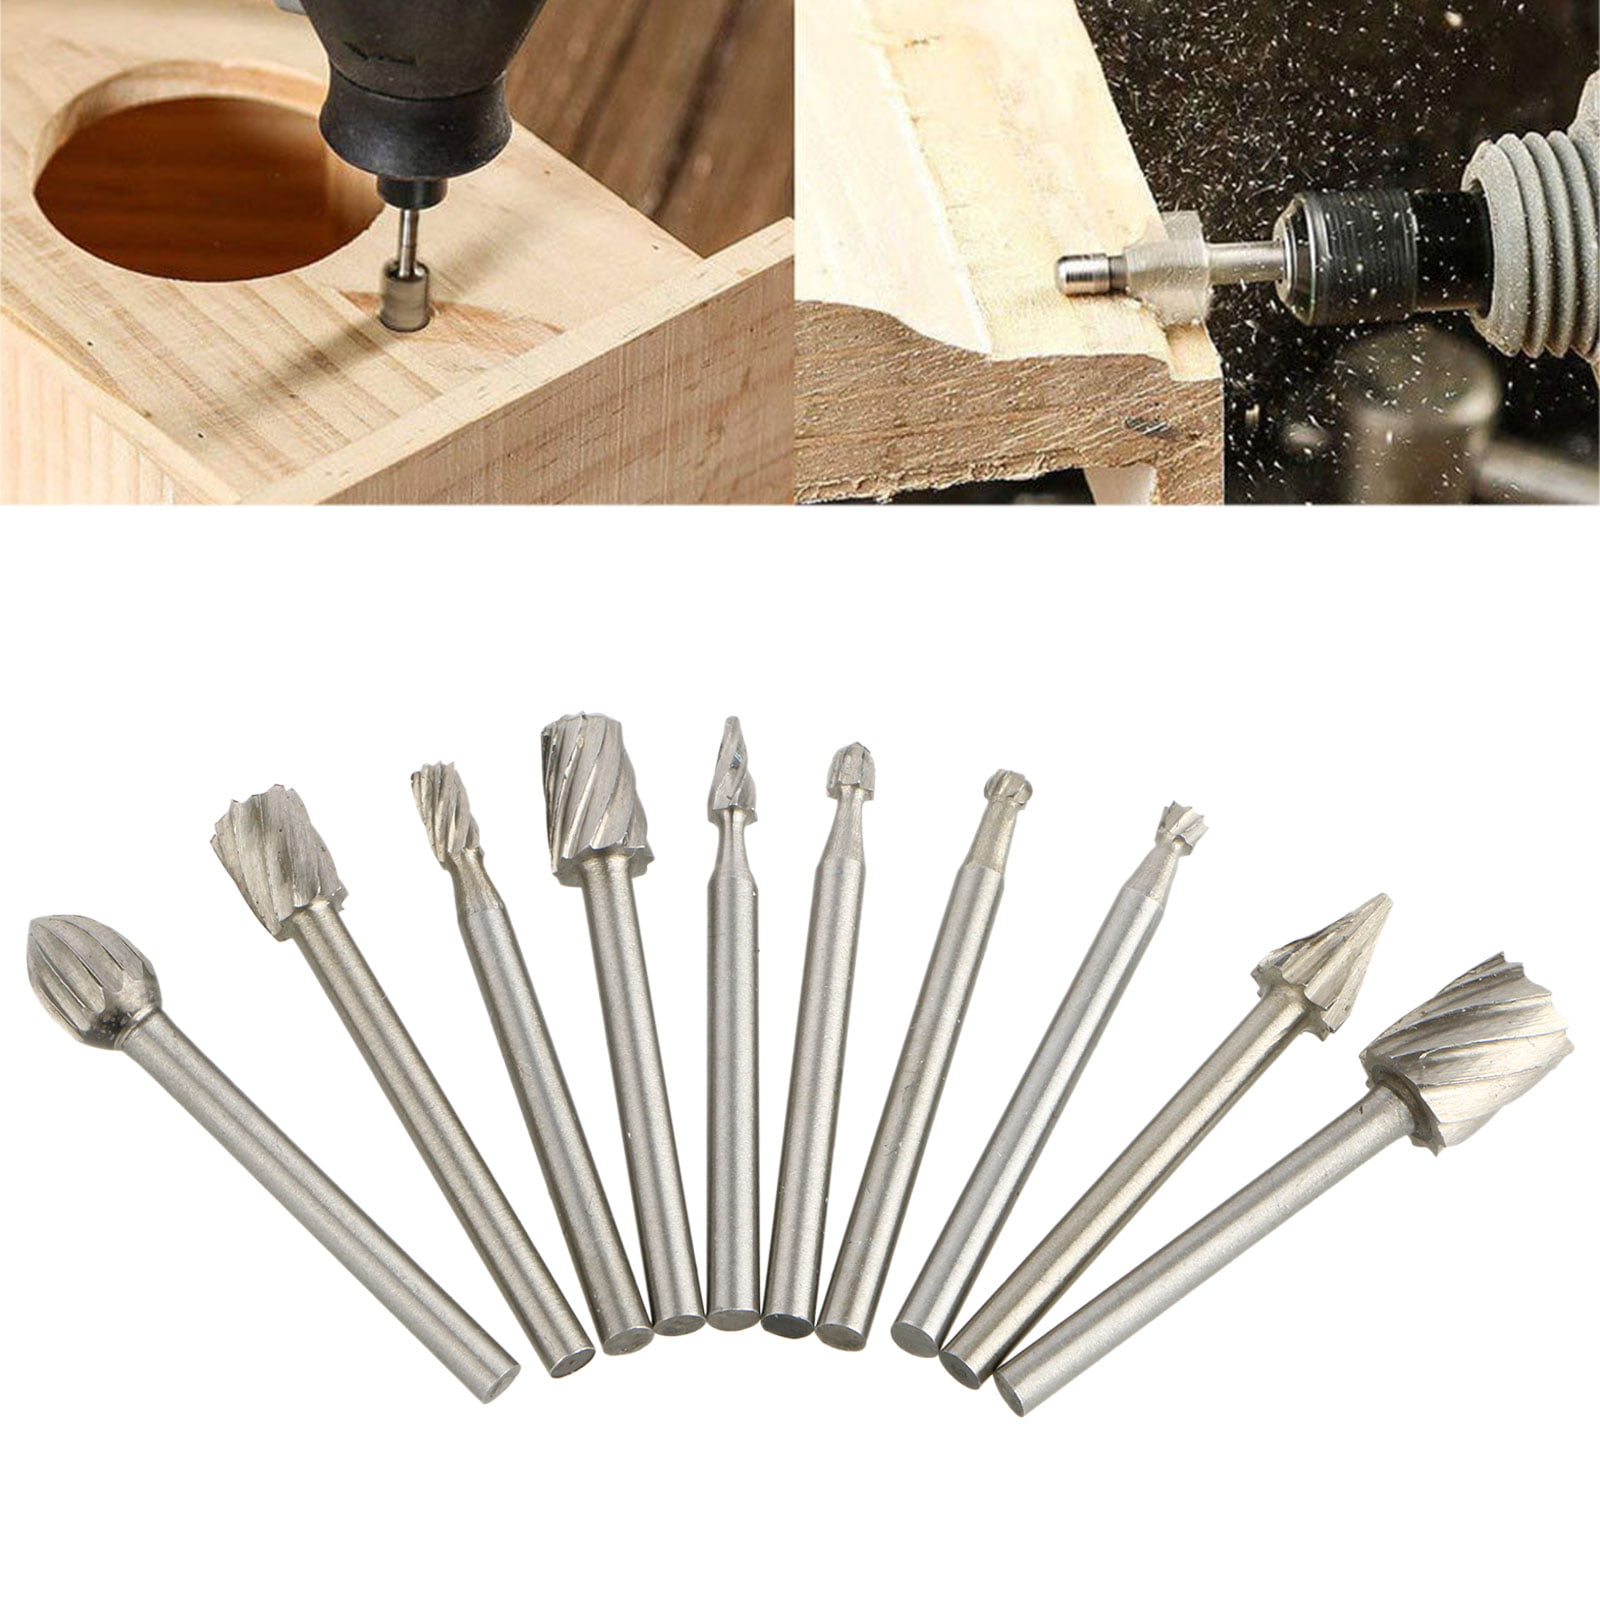 5xWheel Style Engraving Cutter Bits Burrs Bur Carving Rotary Tools Top-Quantity 